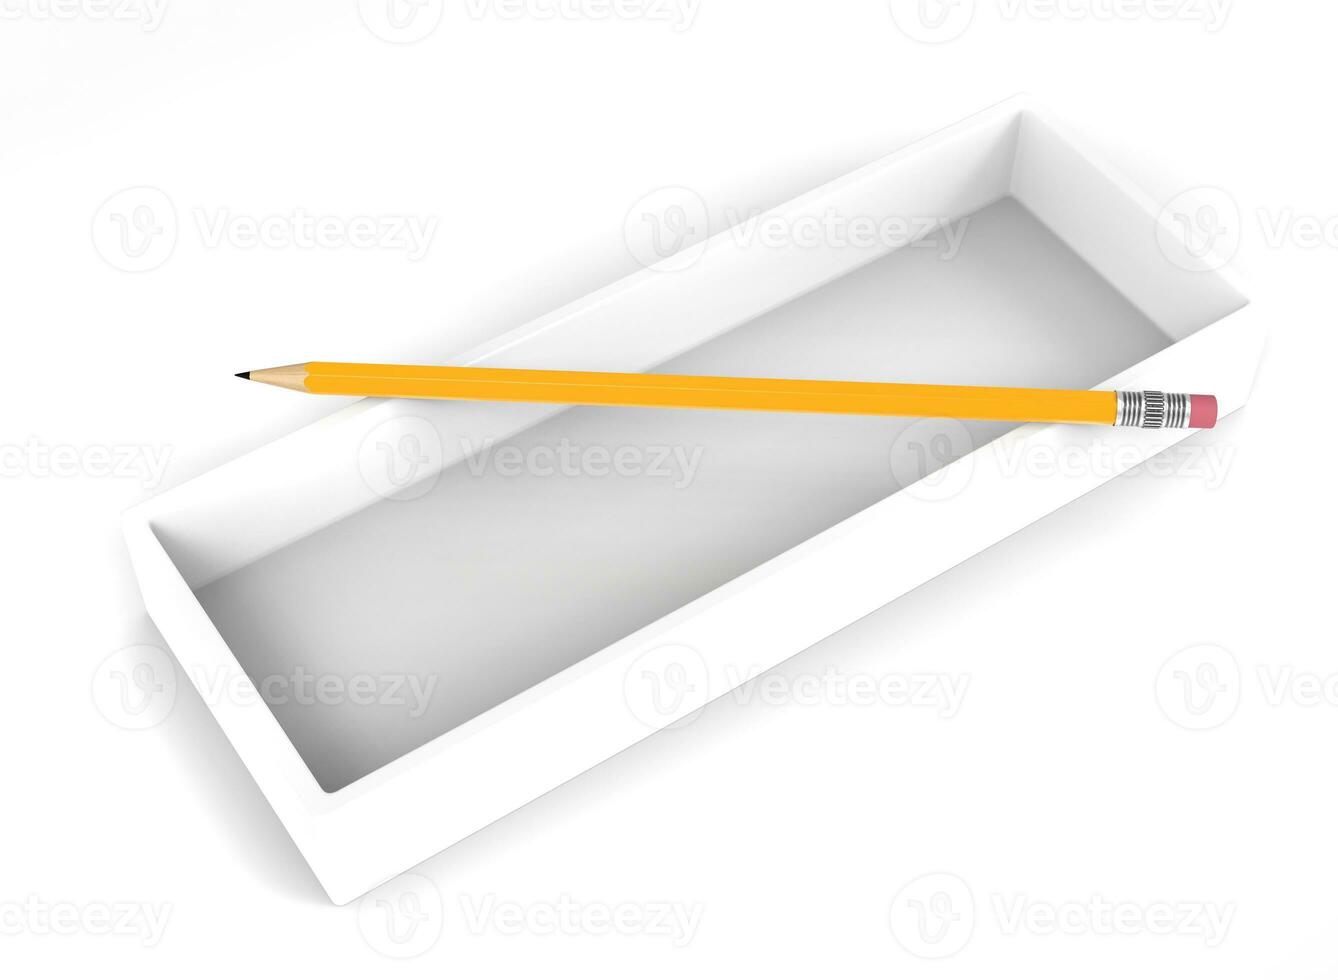 Yellow graphite pencil on top of the empty box photo